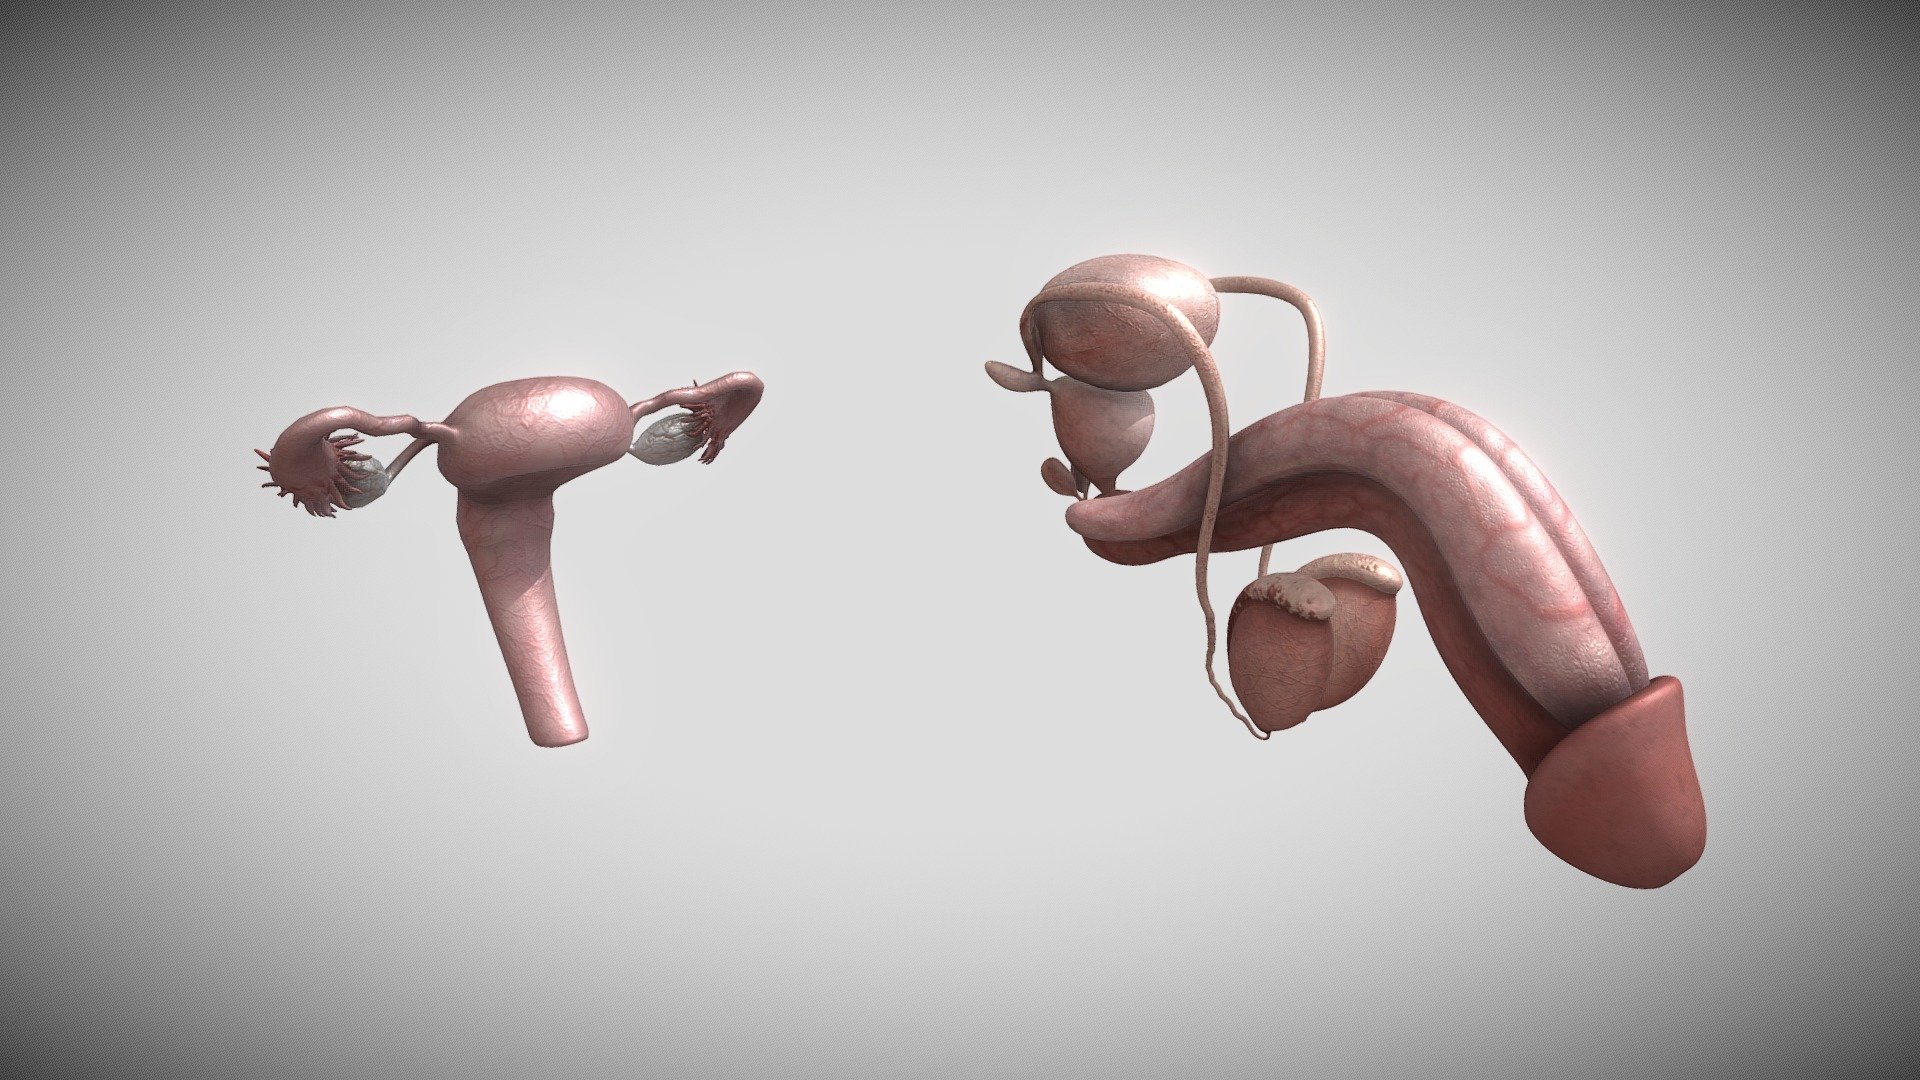 Human-Reproductive System - 3D model by 1225659838@ (@Novaky)  [d3494a1]